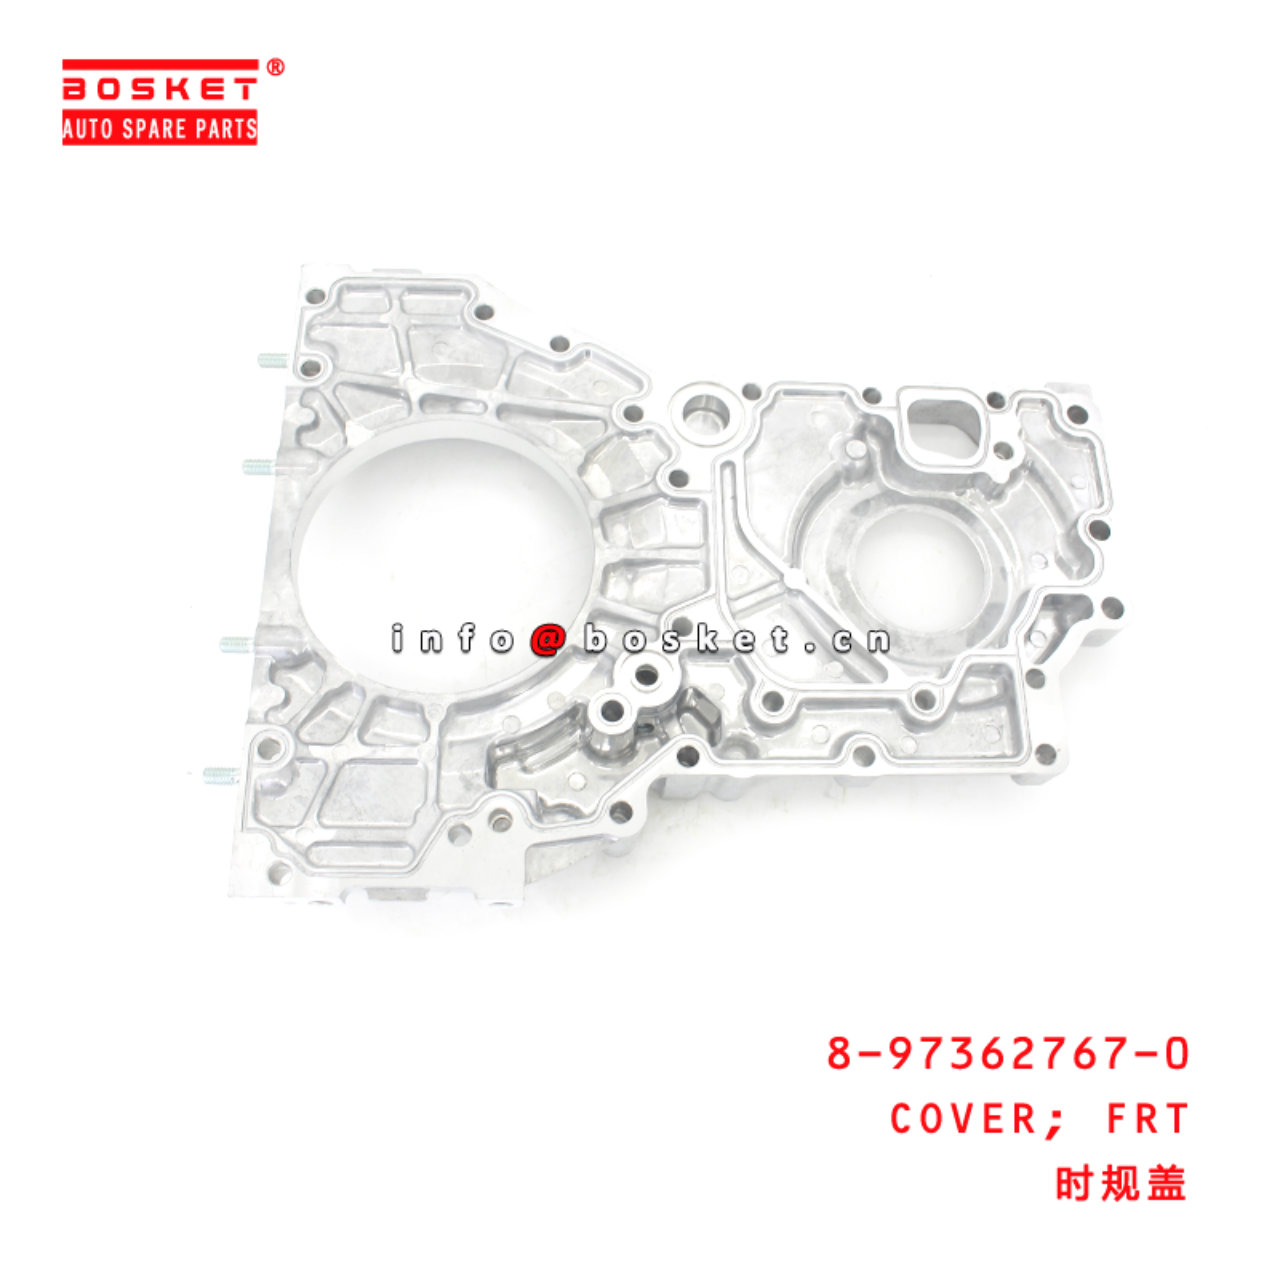 8-97362767-0 Front Cover suitable for ISUZU 700 4HK1 8973627670